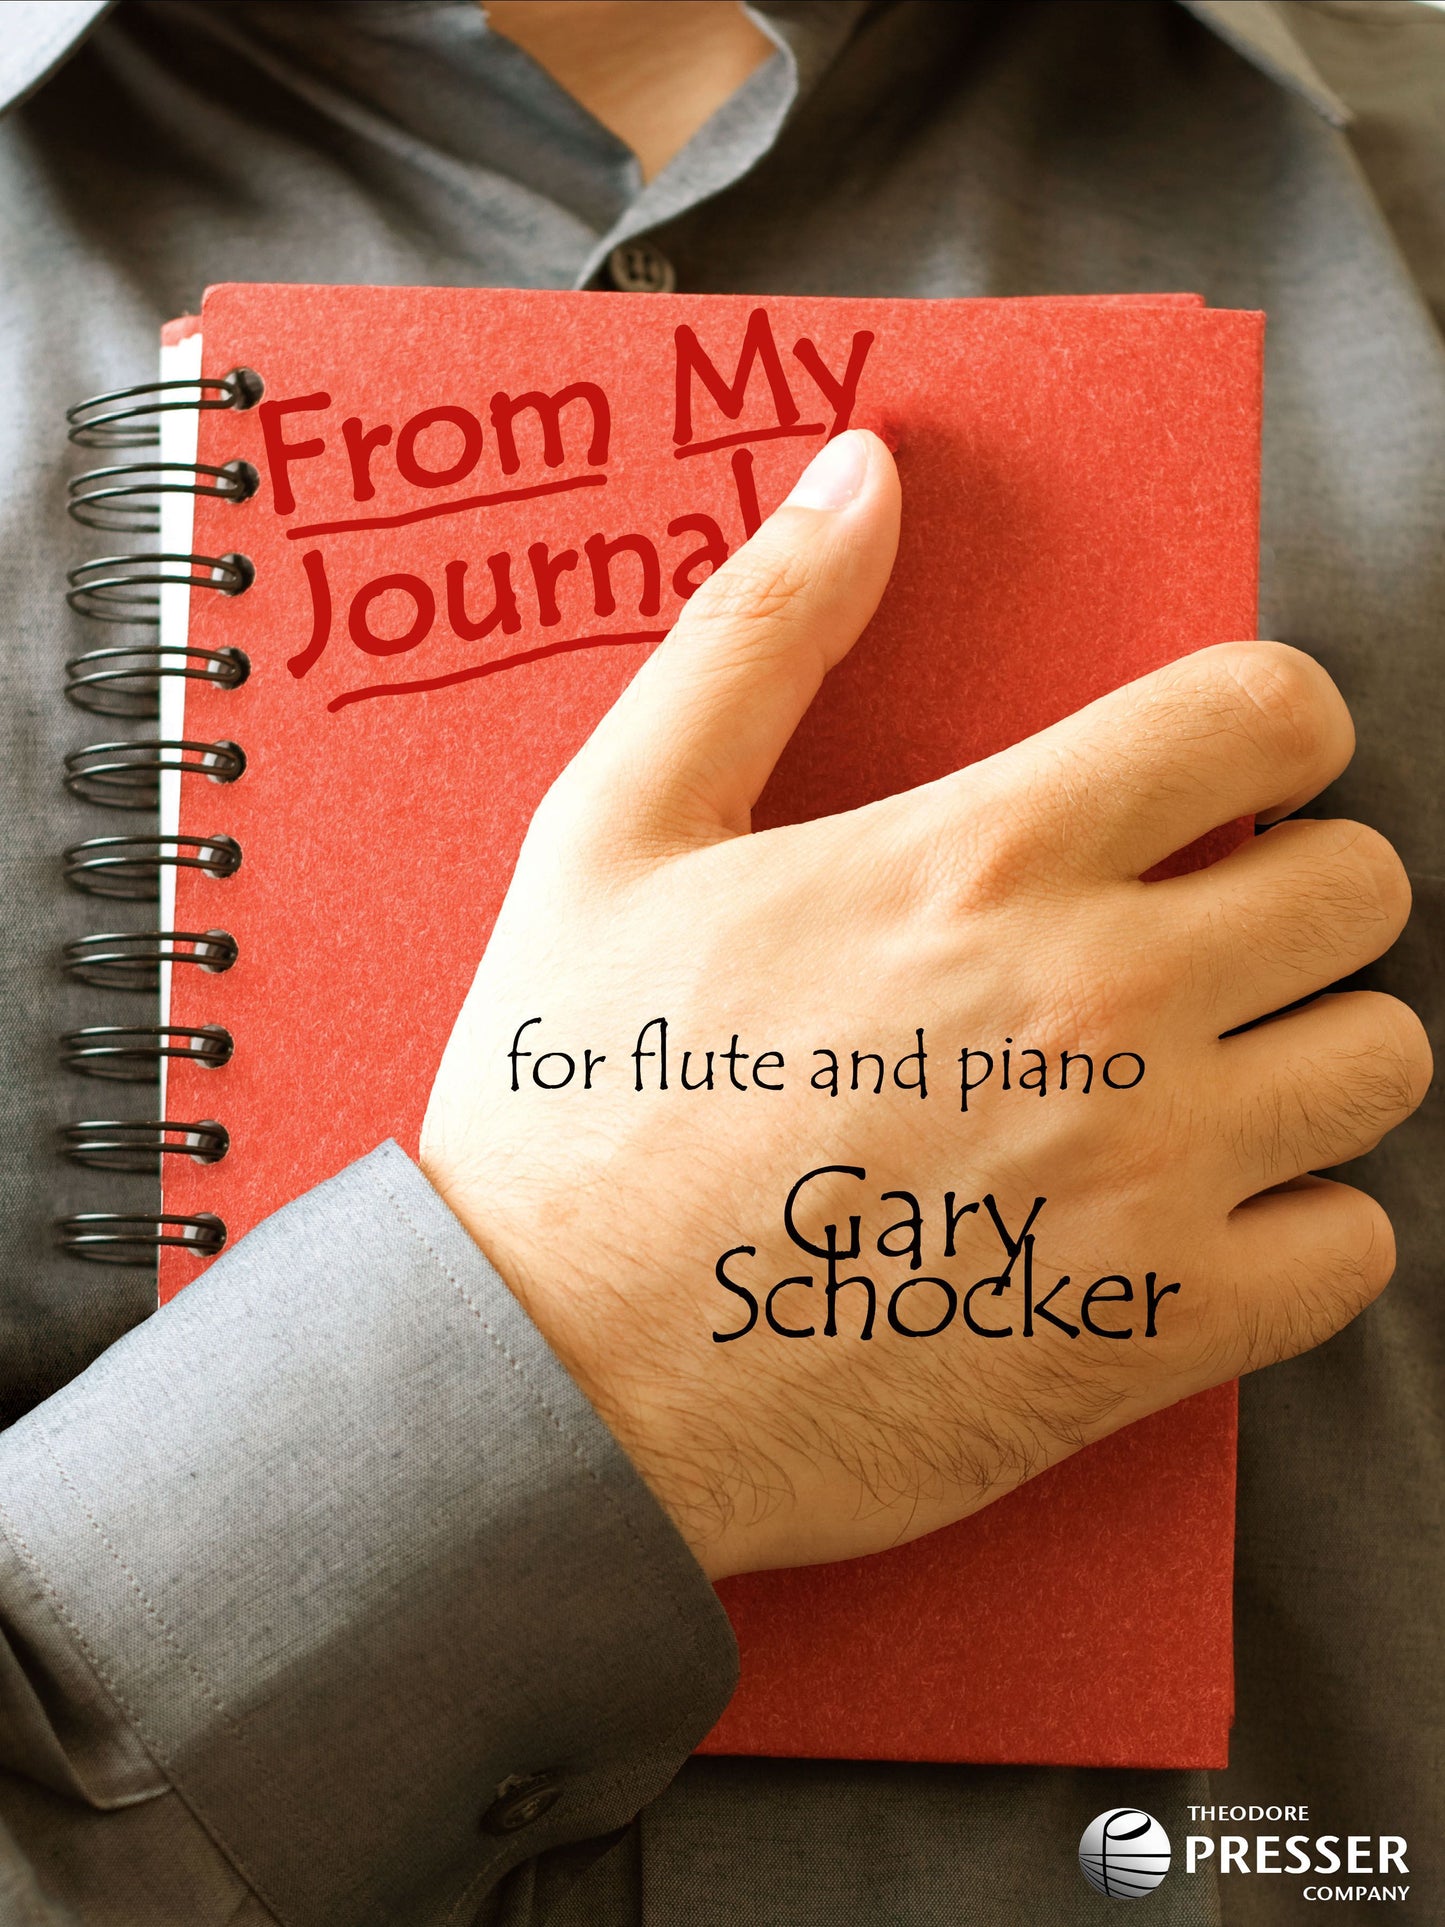 Schocker, Gary -From My Journal for flute and piano